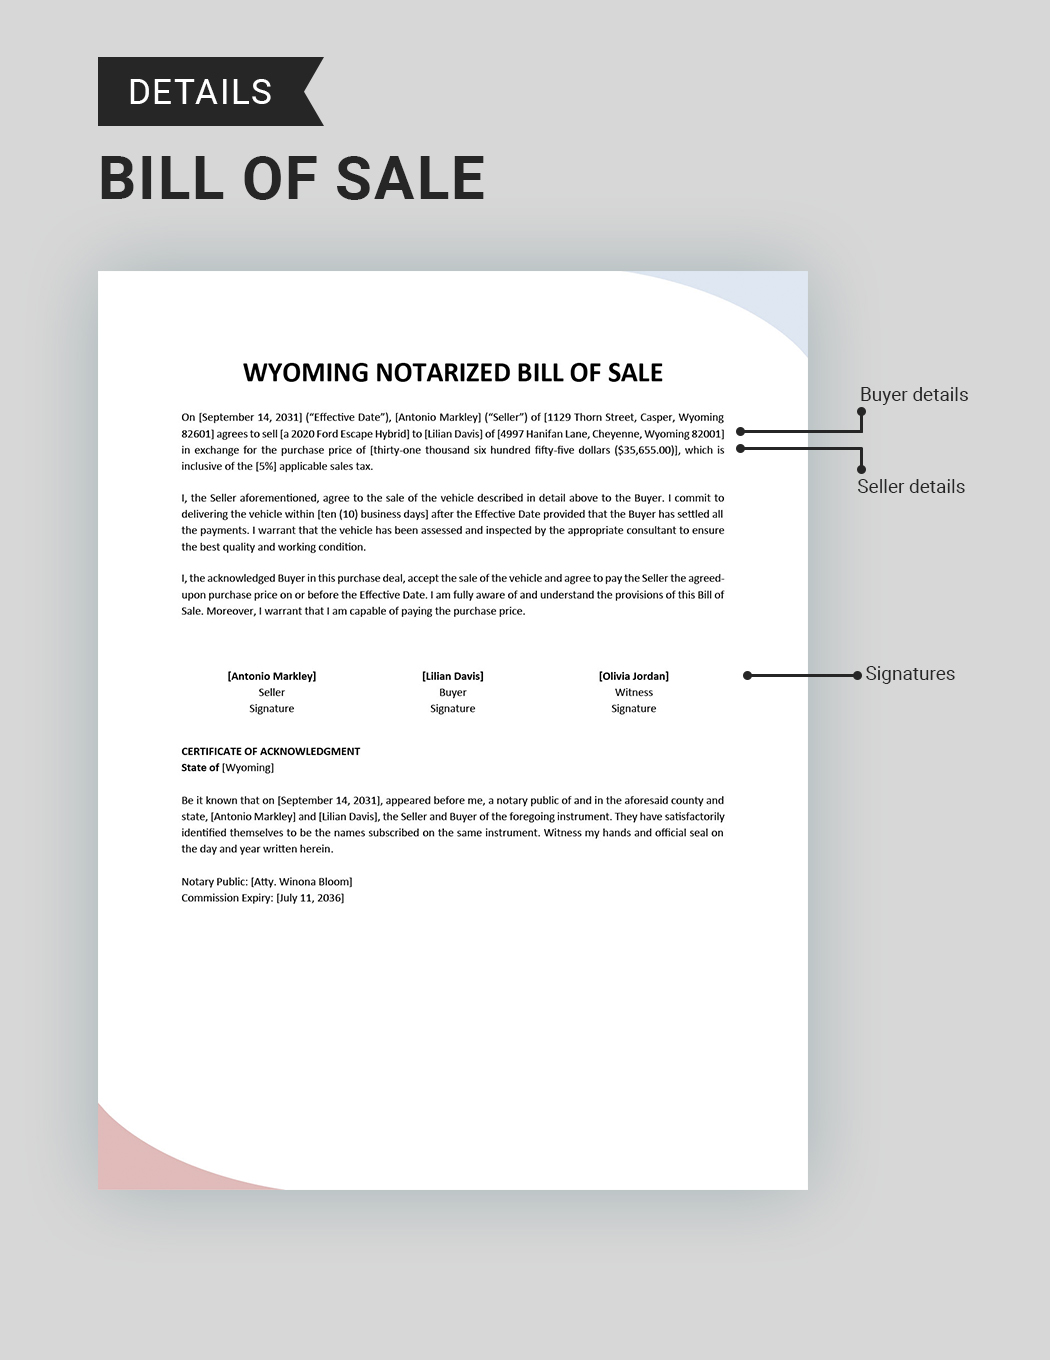 Wyoming Notarized Bill of Sale Template